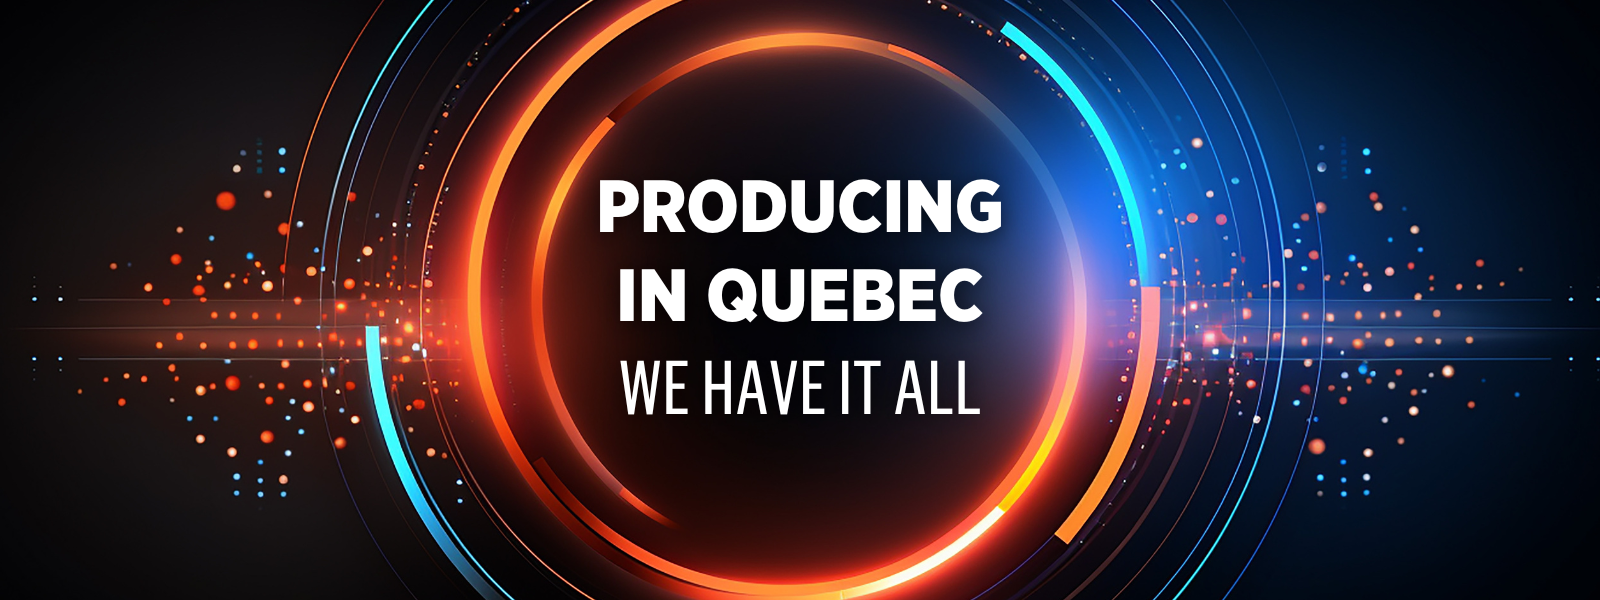 Producing in Quebec: We have it all